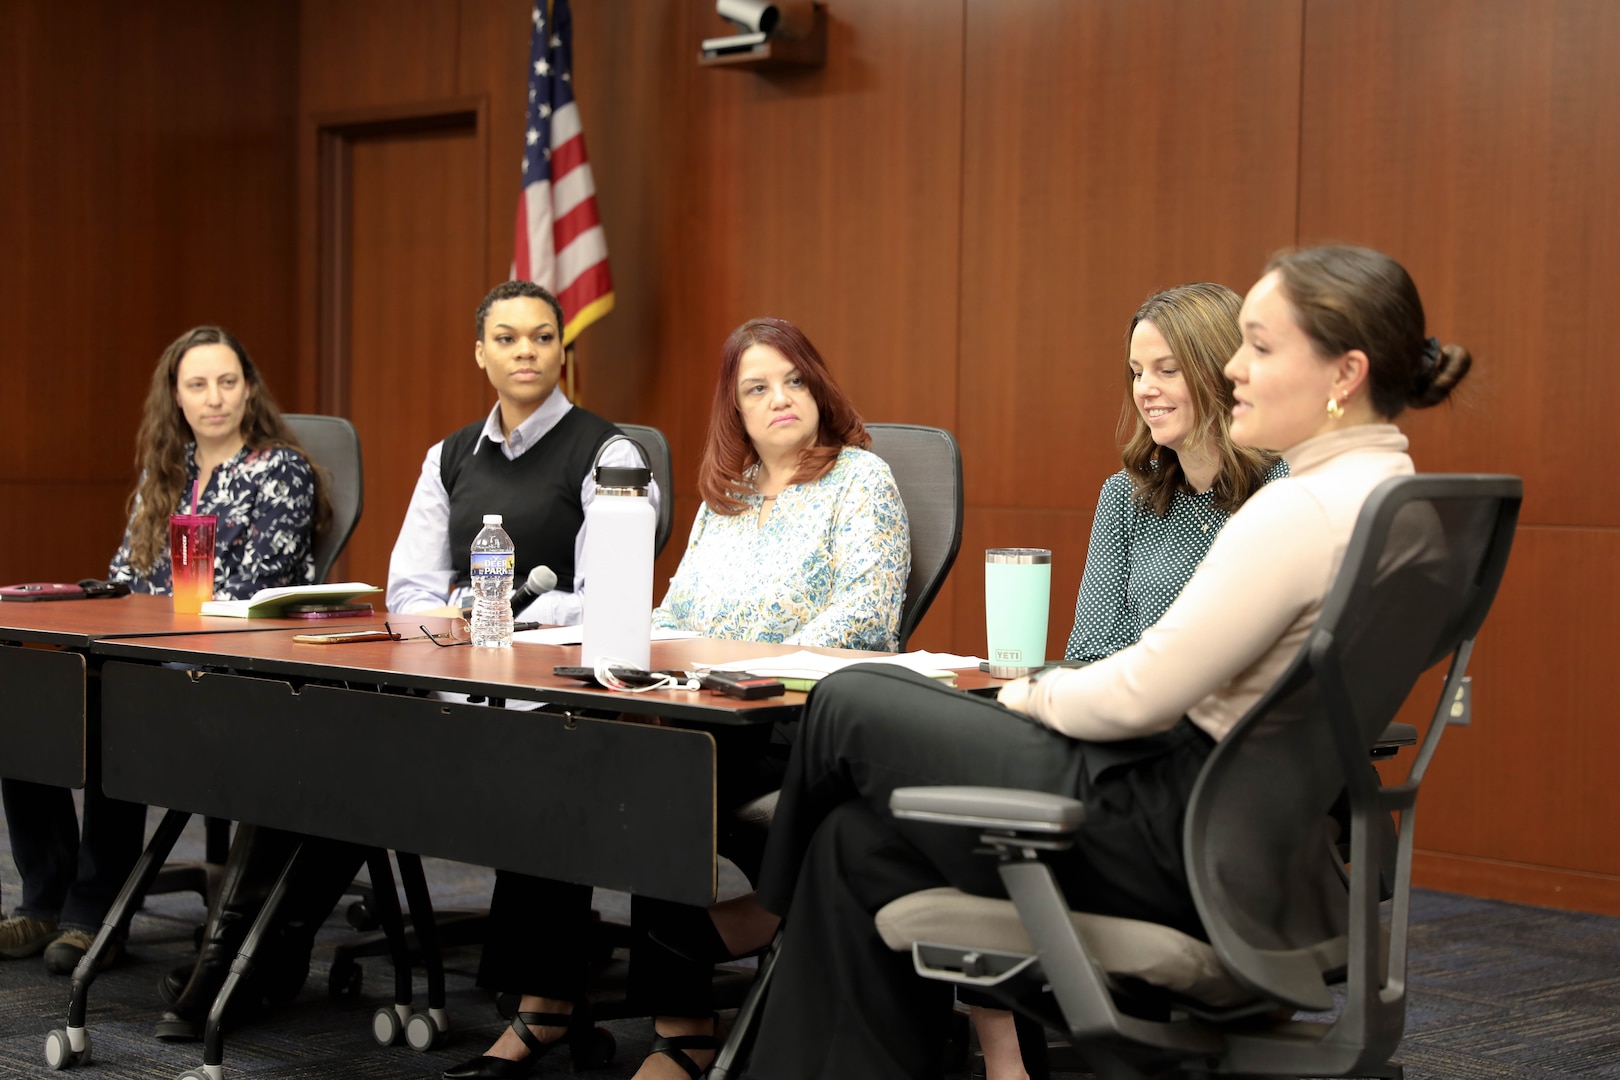 (from right) Naval Surface Warfare Center, Philadelphia Division (NSWCPD) In-Service Fuel Oil Lead and Women’s Employee Resource Group (WERG) Acting Chair Michelle Klem serves as moderator for a hybrid panel discussion presented by NSWCPD’s WERG and Equal Employment Opportunity (EEO) Diversity and Inclusion (ED&I) Office with Program Manager Monica Schrank, Logistics Management Specialist Marie Ramos-Santana, Mechanical Engineer Taylor Barnett, and Mechanical Engineer Ashley Ferguson making up the panel on March 30, 2023. (U.S. Navy photo by Phillip Scaringi/Released)